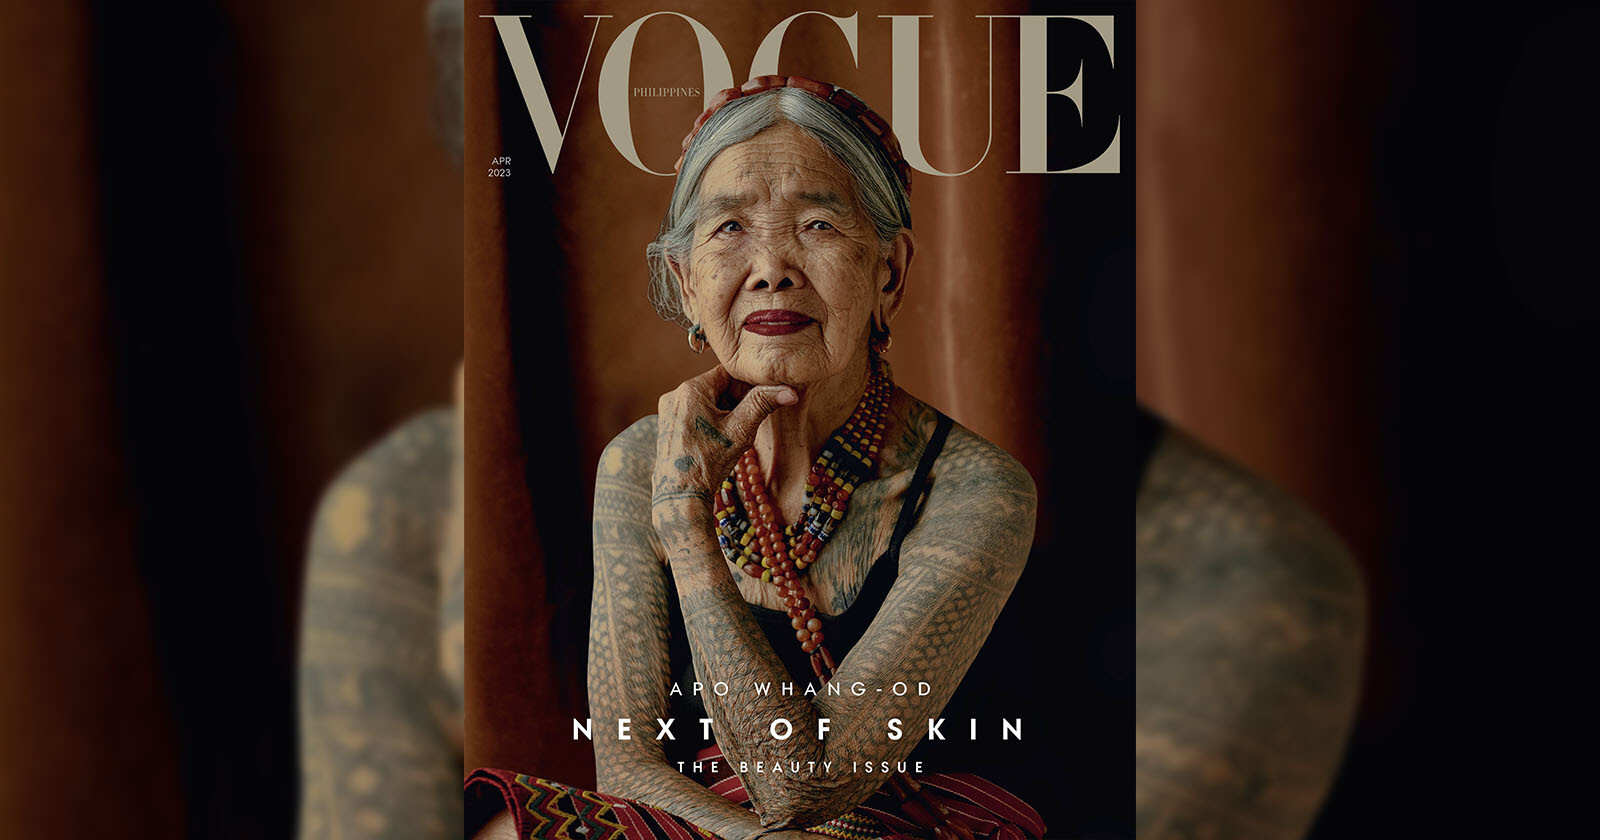  tattooed 106-year-old becomes vogue oldest ever cover model 